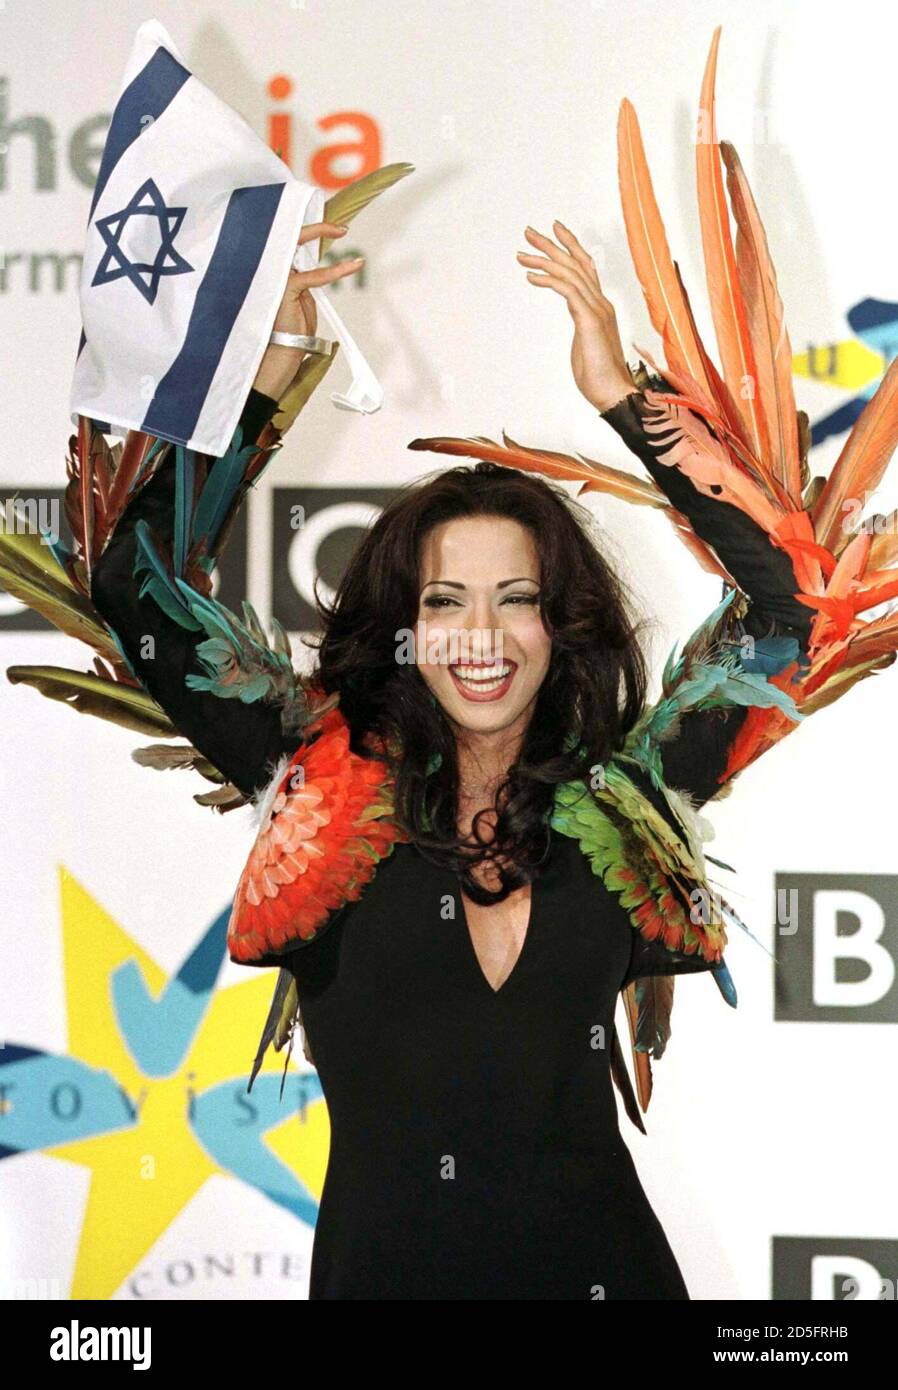 At deaktivere magnet Folkeskole Israel's transsexual Dana International celebrates winning the Eurovision  Song contest at the National Indoor Arena in